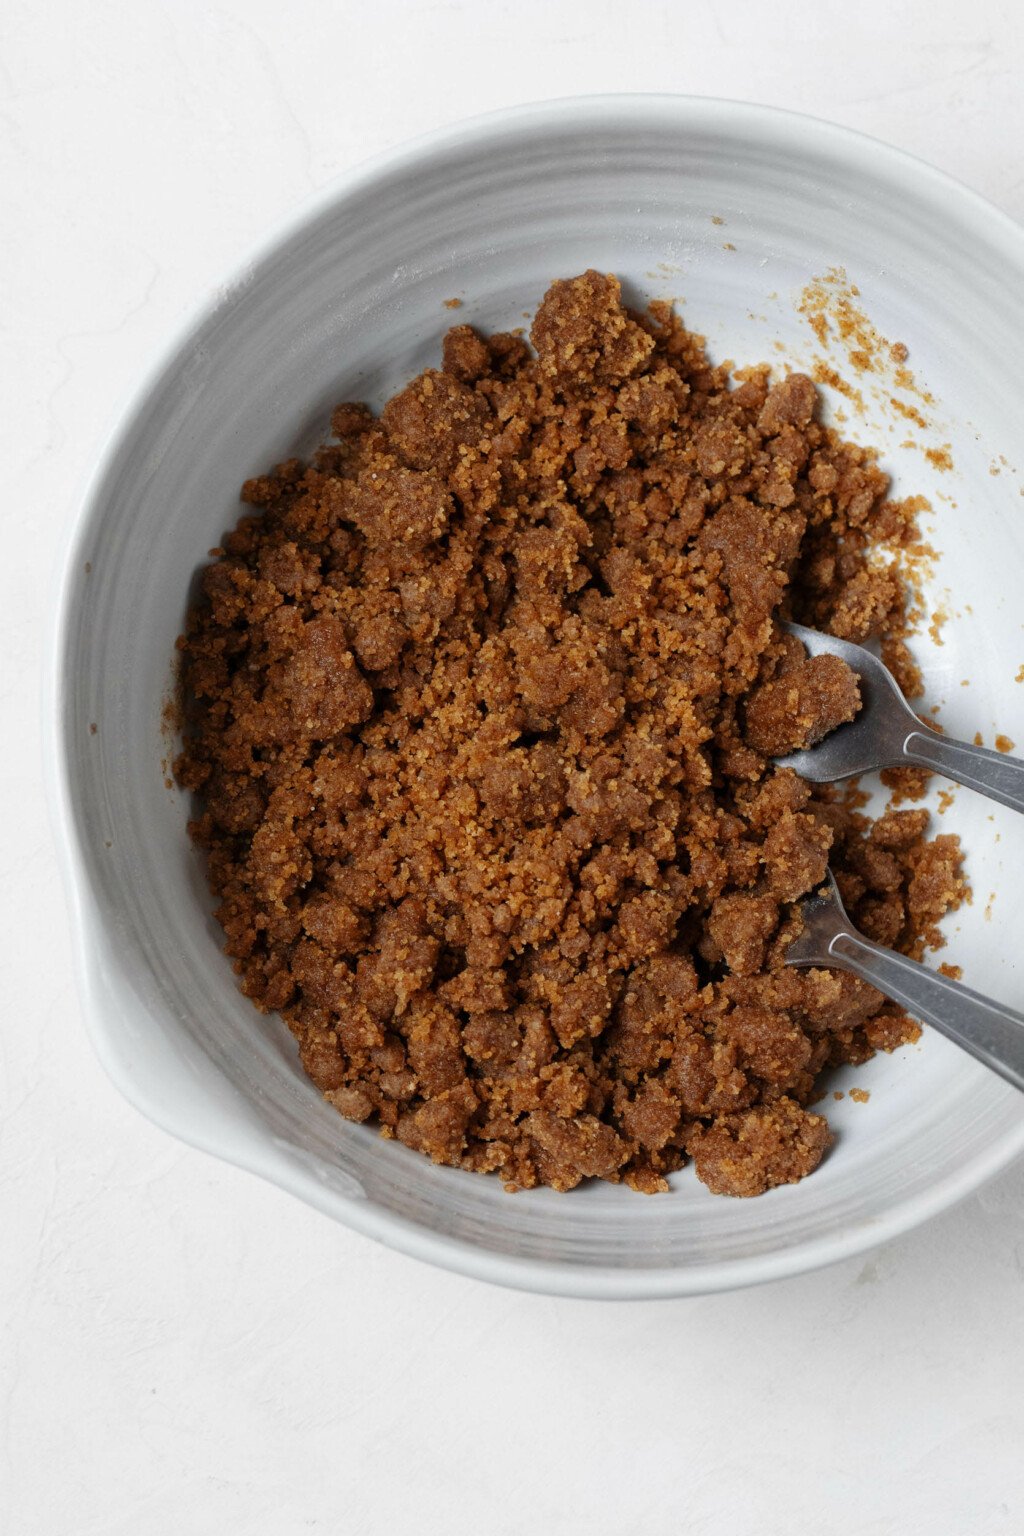 A white mixing bowl is being used to hold a plant-based streusel topping. There are big, deep brown crumbs pictured in the bowl.